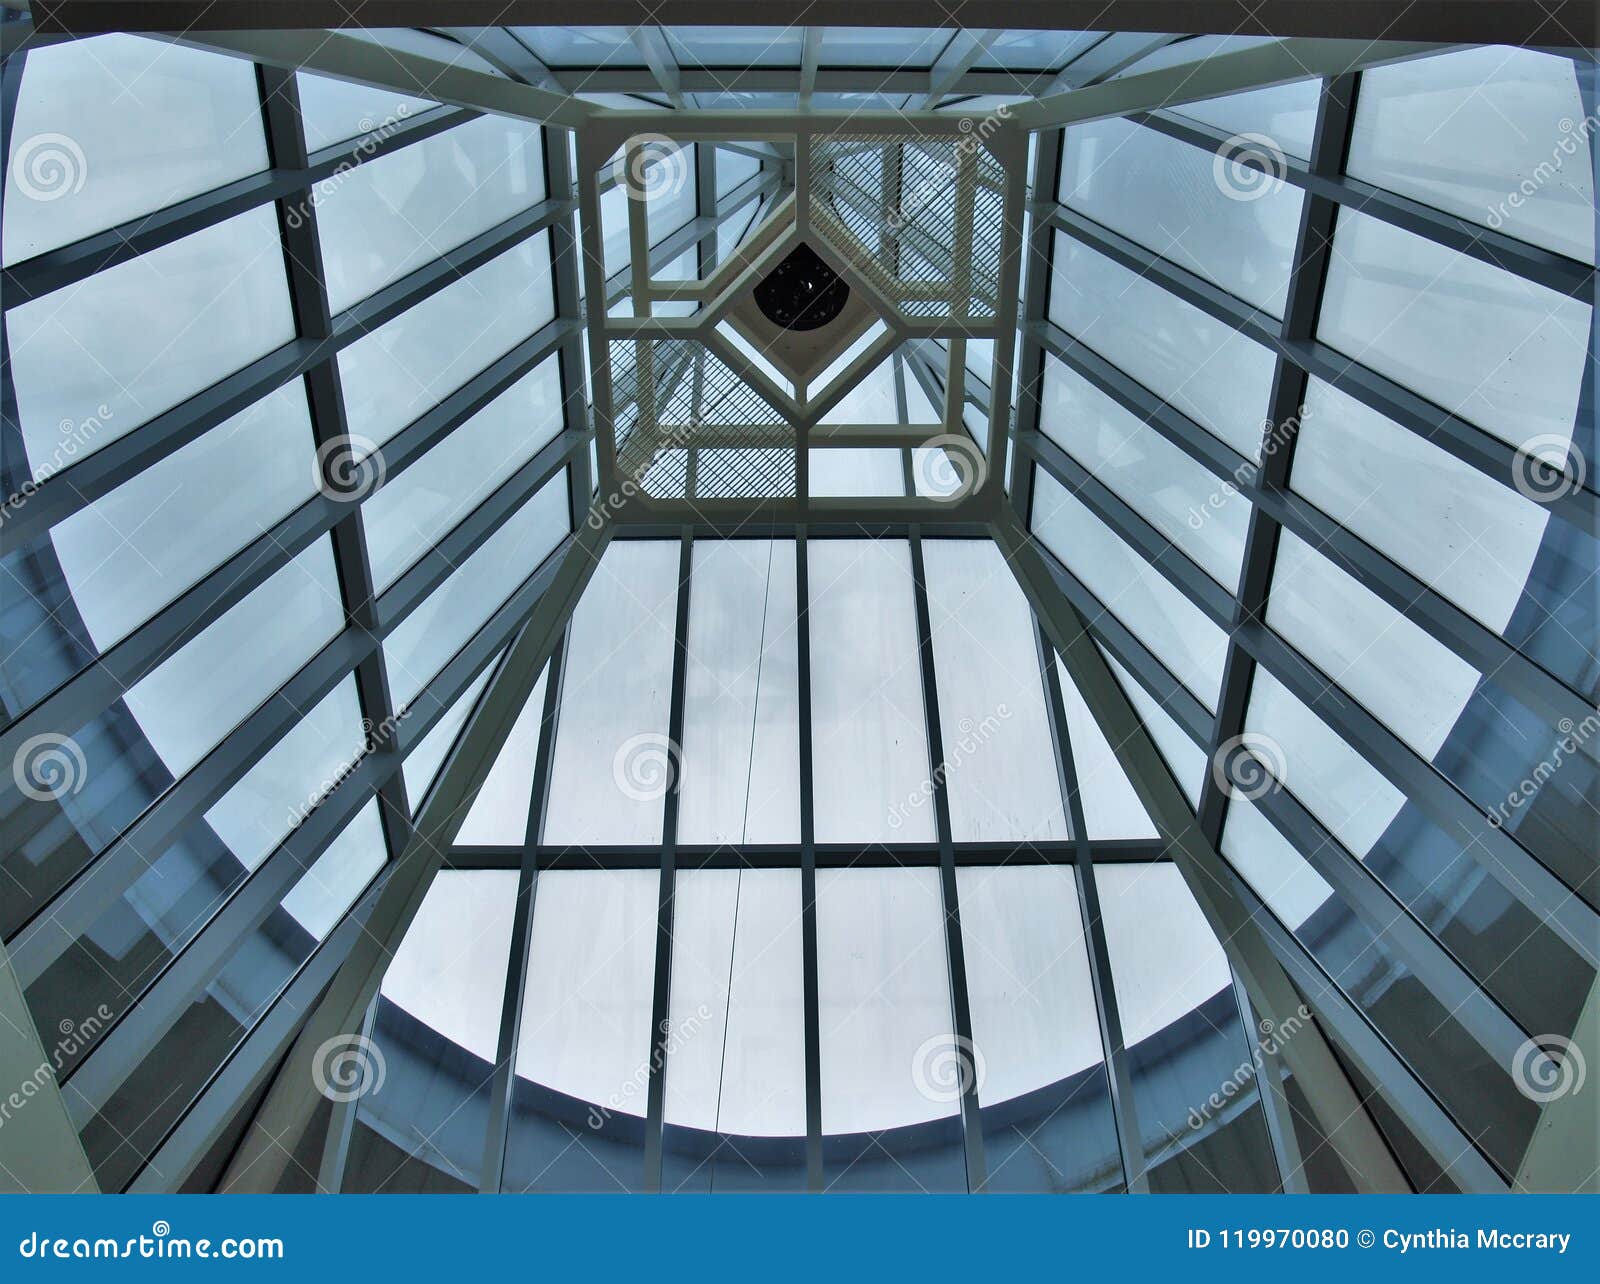 looking at the sky through skylights